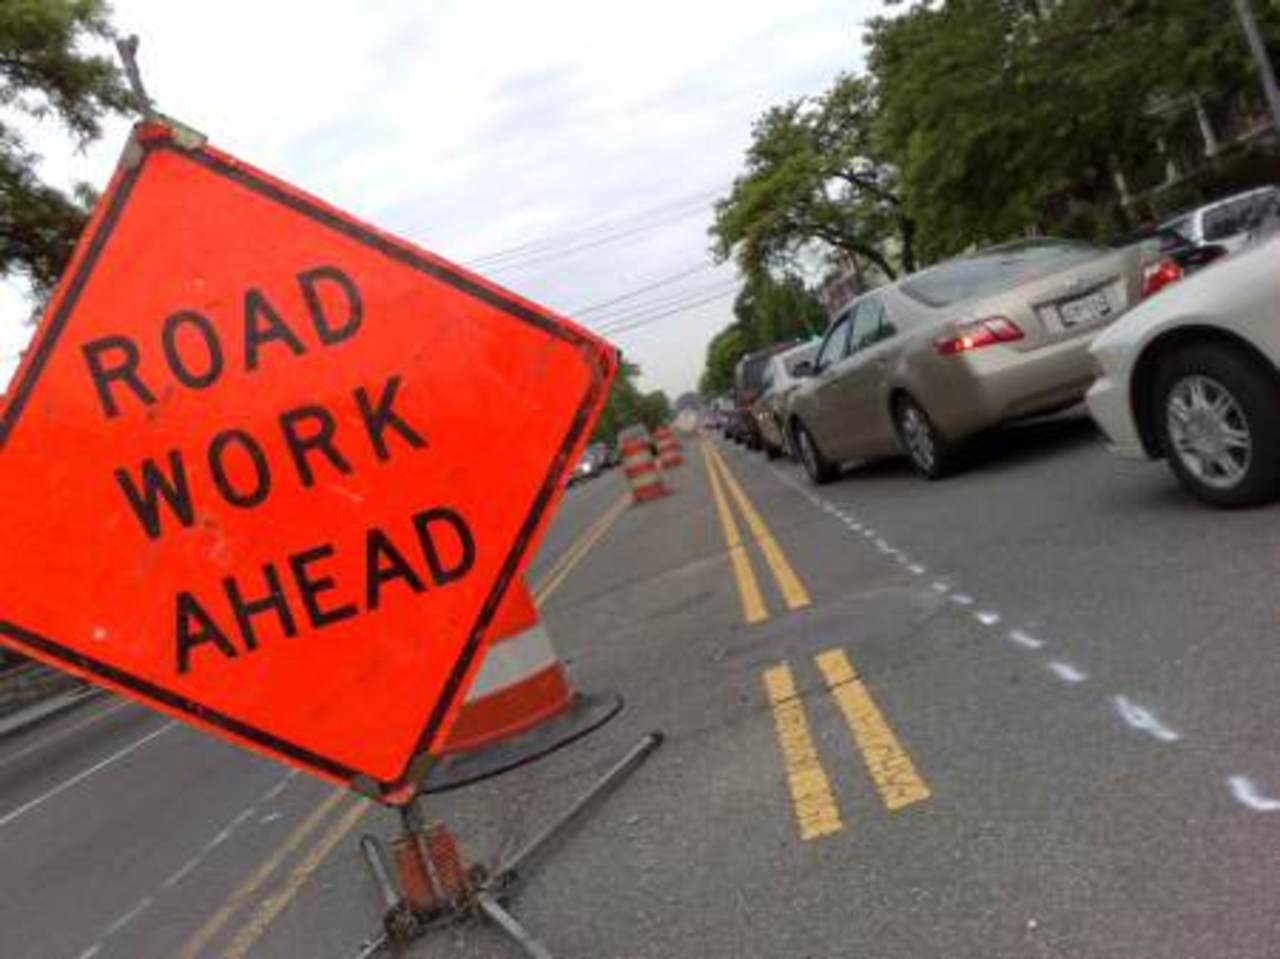 North Castle Highway Department officials say roadwork on several roads is set to start soon.